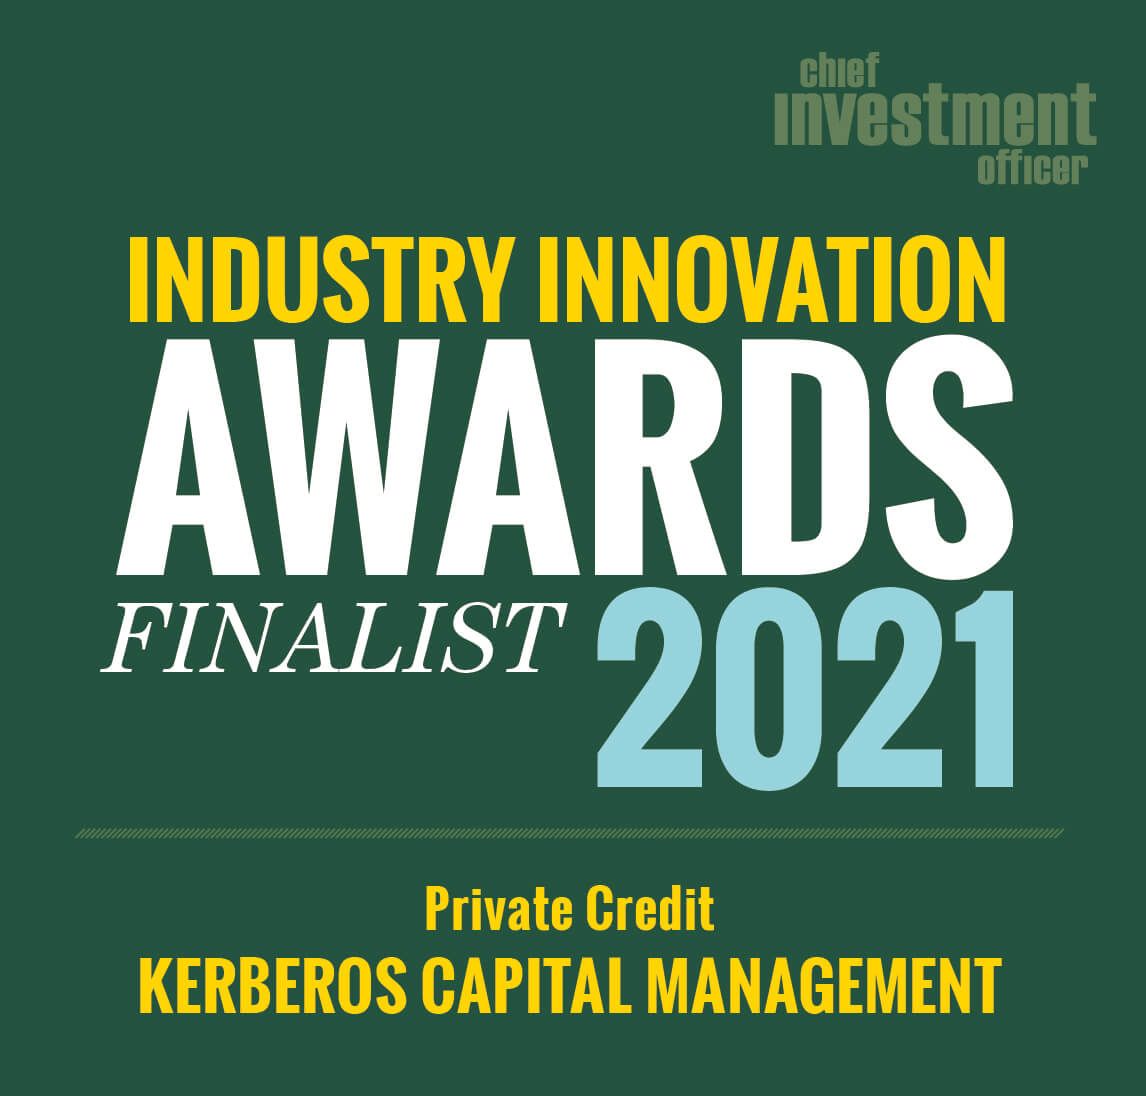 Industry Innovation Awards Finalist 2021 - Private Credit